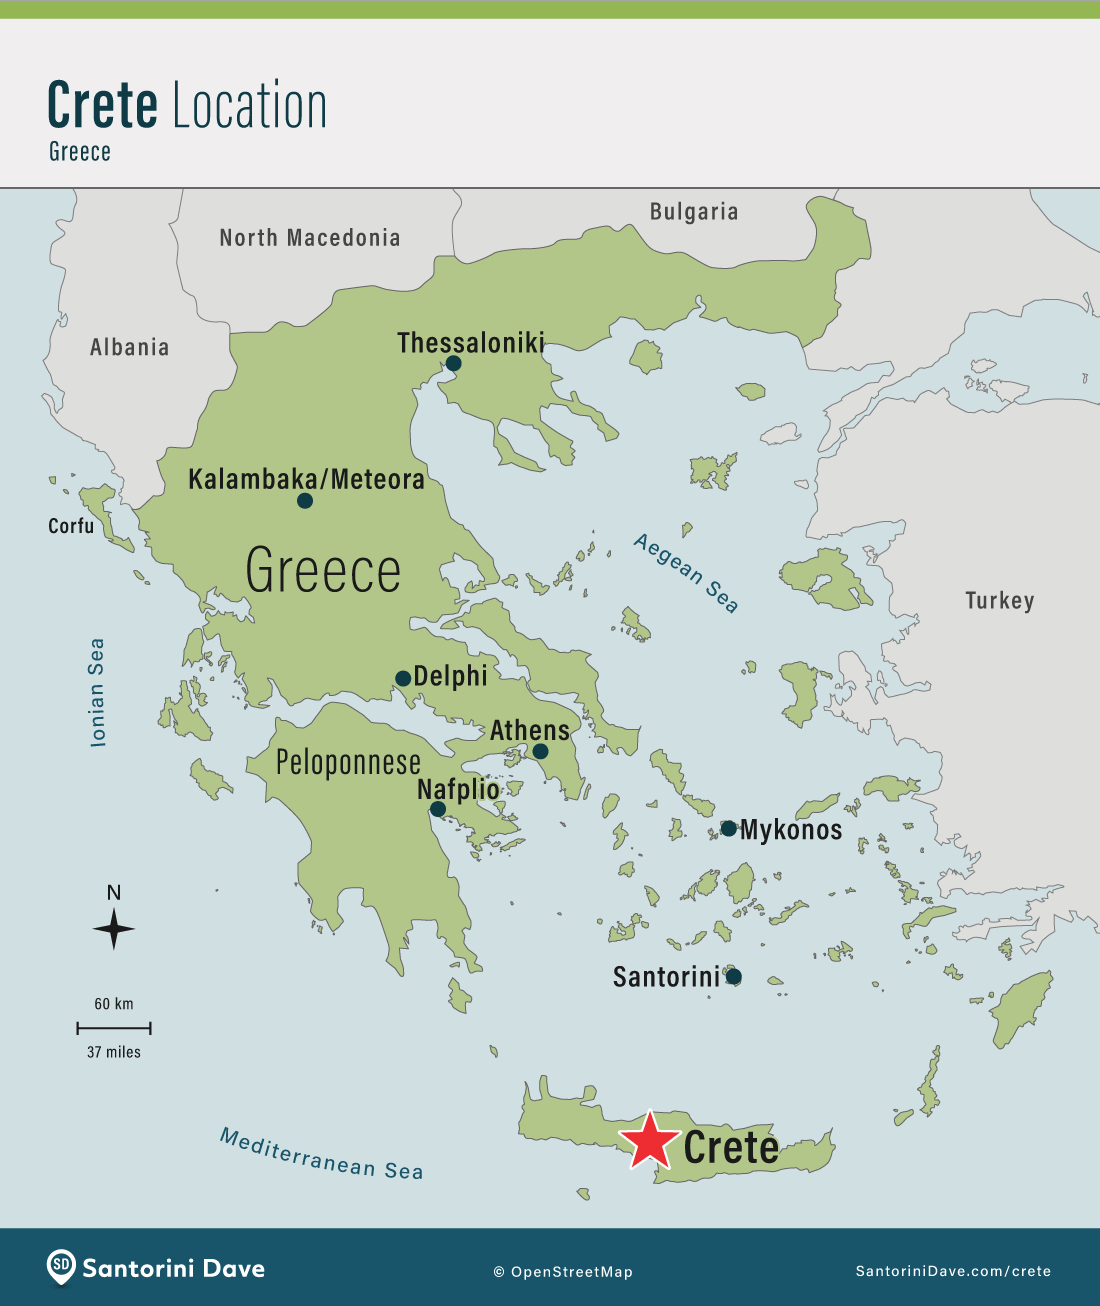 Map showing the location of Crete within Greece